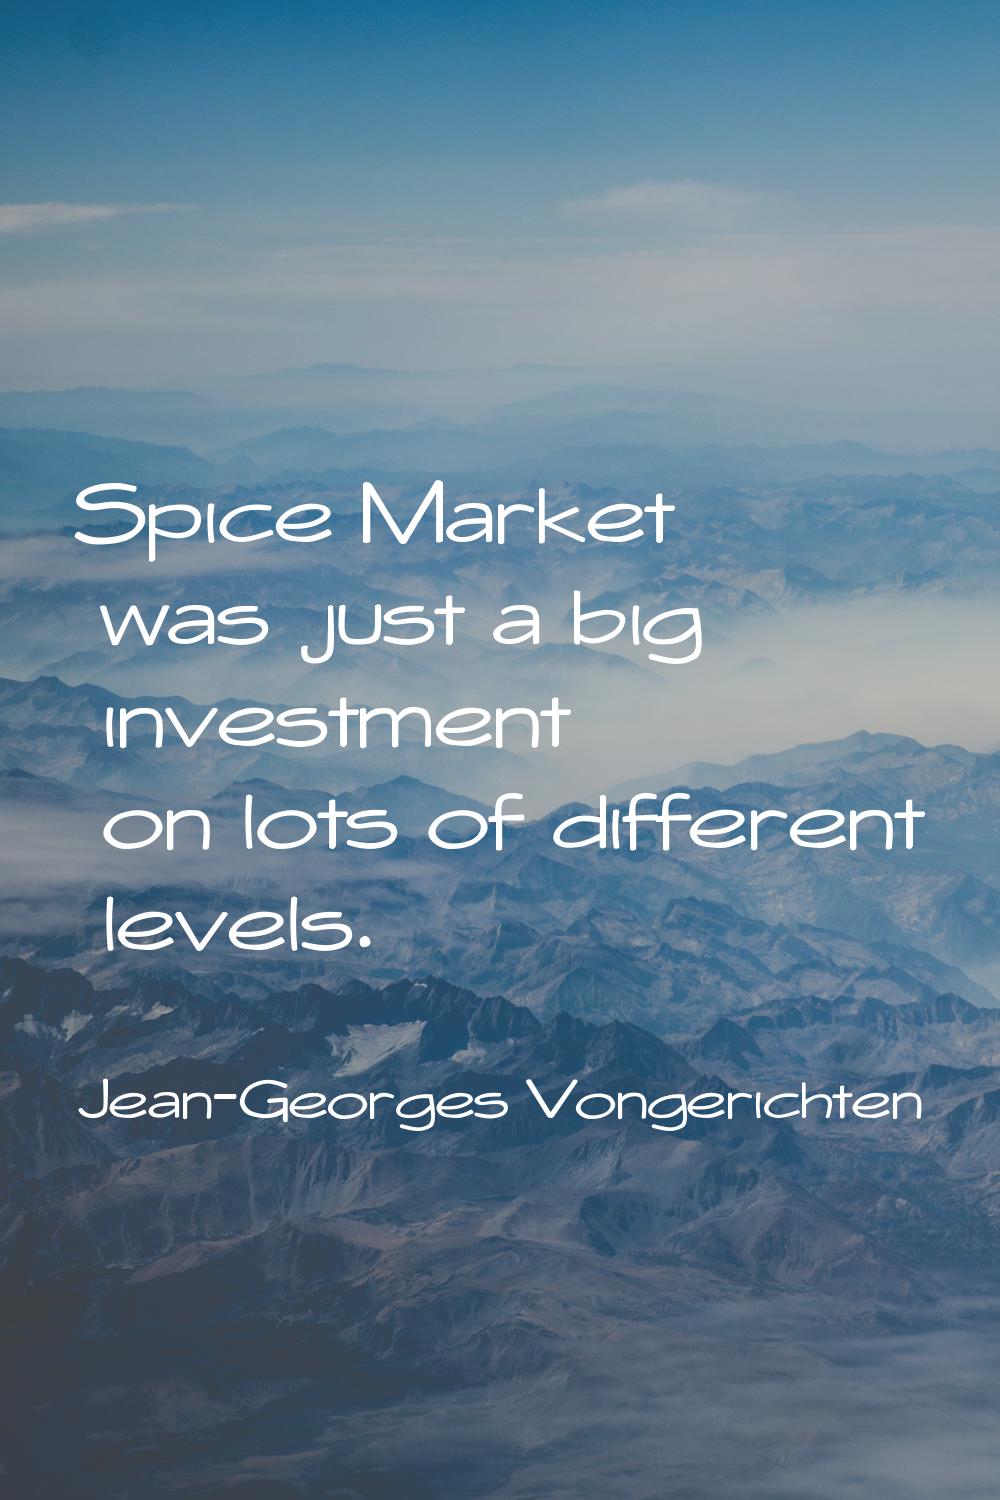 Spice Market was just a big investment on lots of different levels.